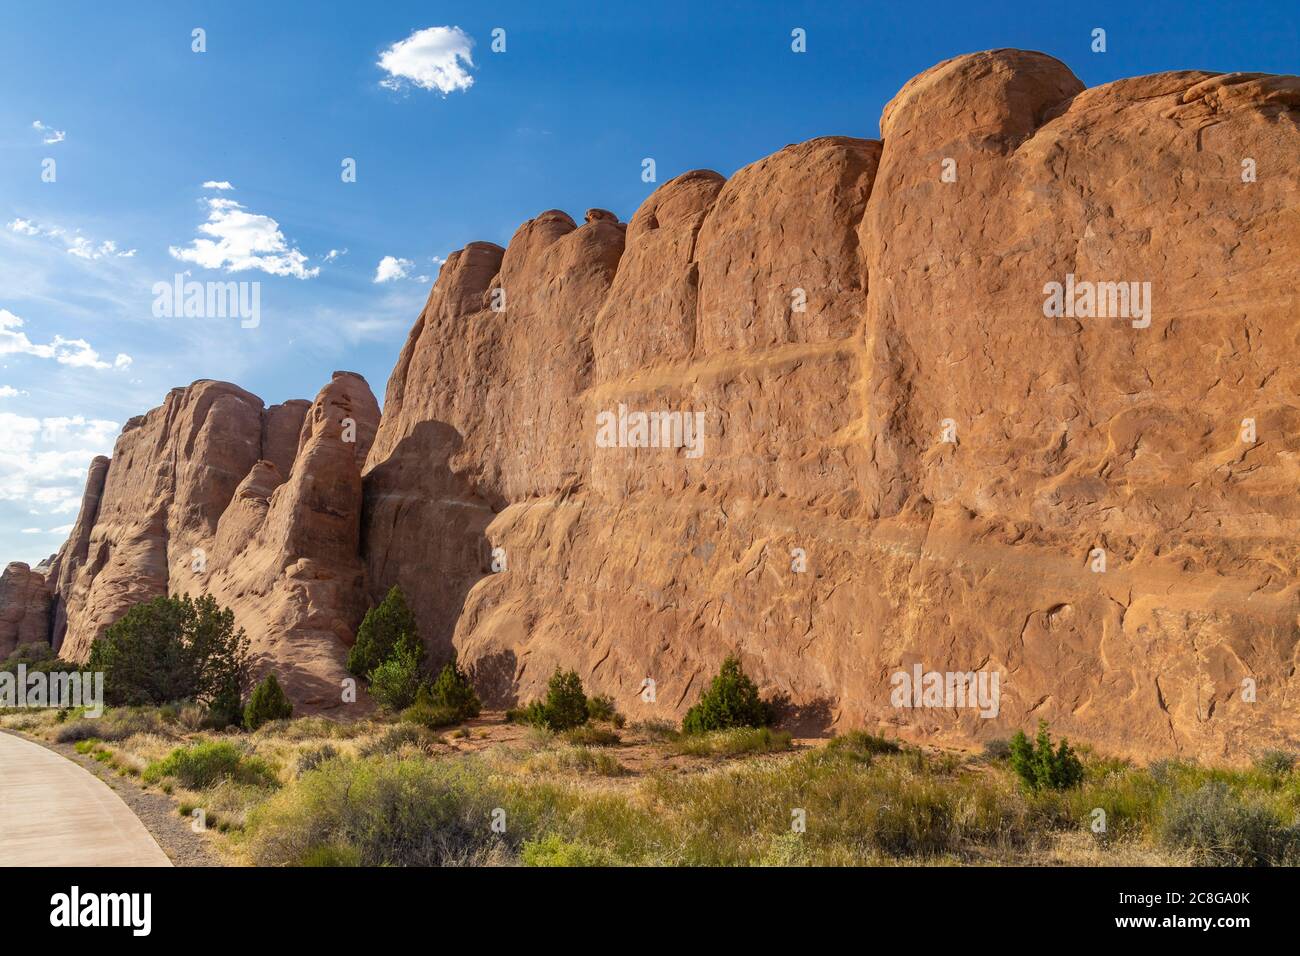 Rock formation in Arches National Park, USA Stock Photo